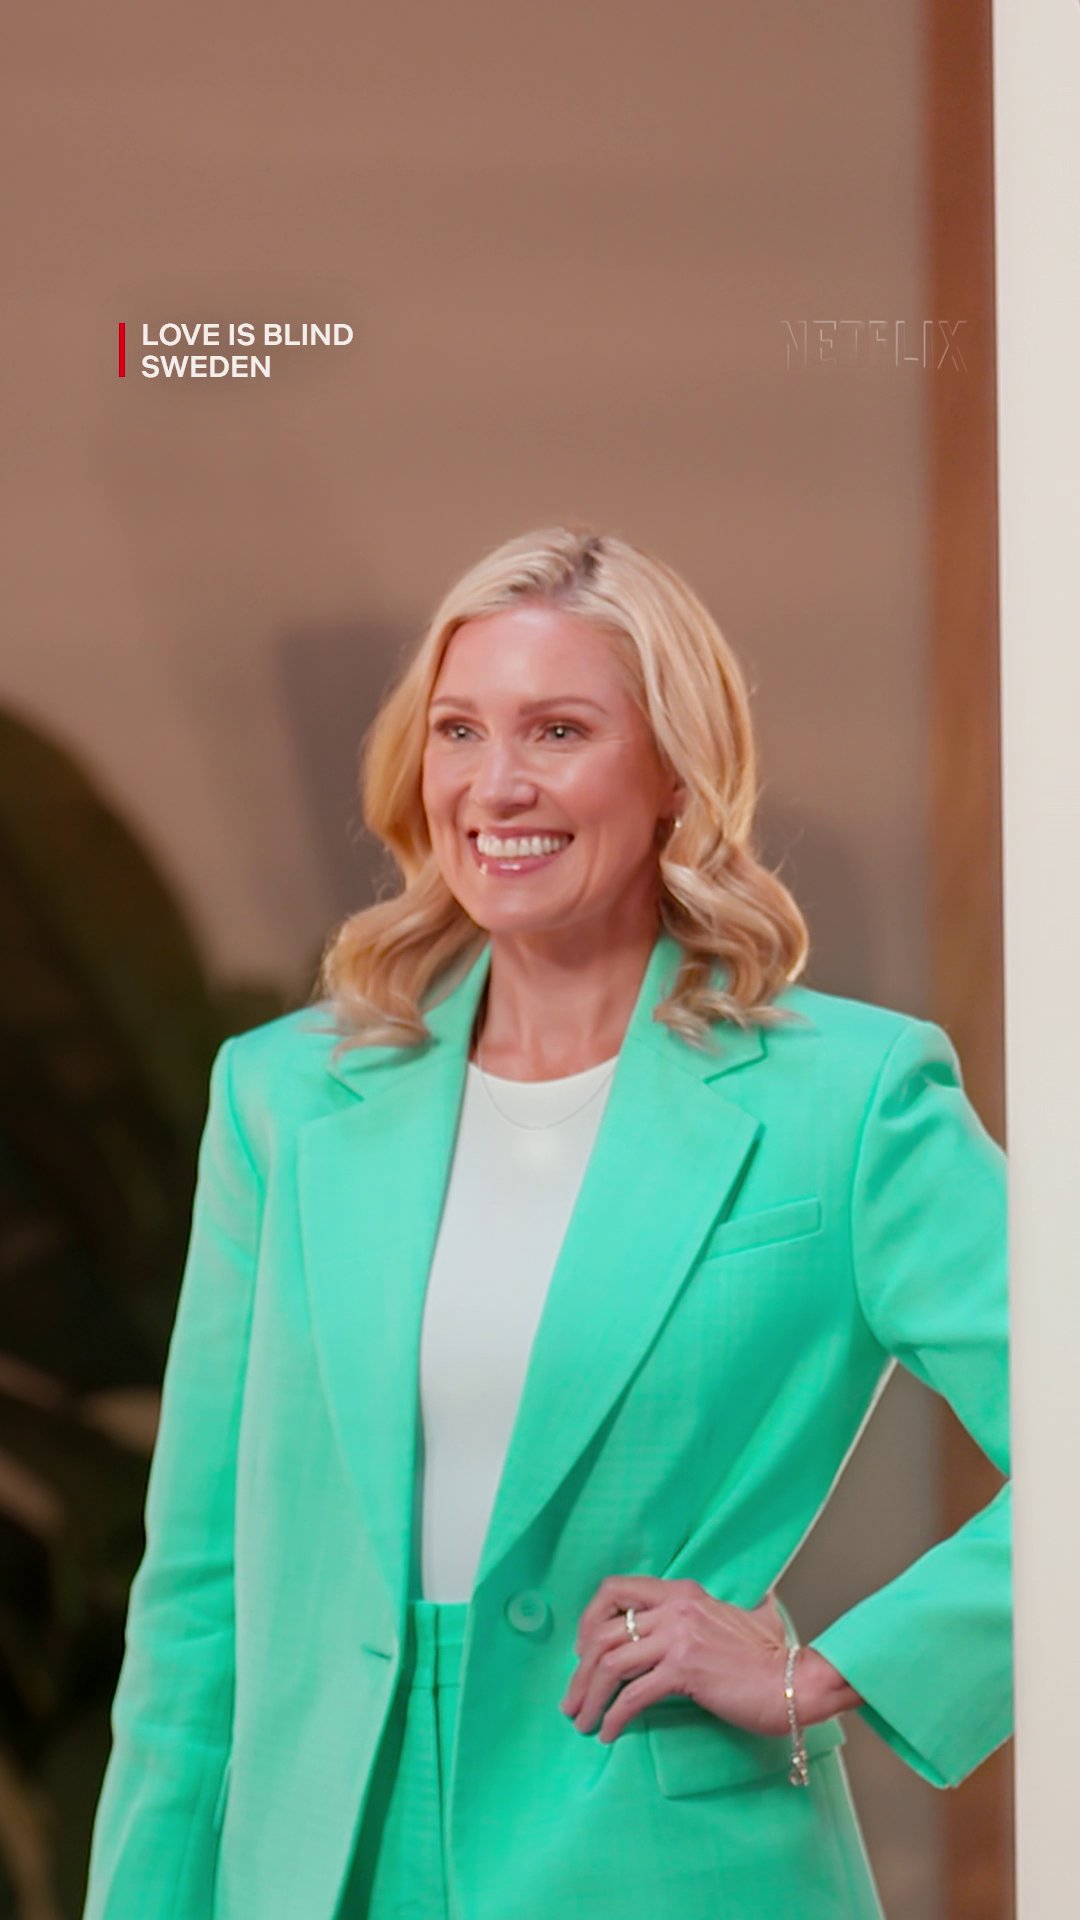 Love Is Blind Sweden' Reveals the Premiere Date and Jessica Almenäs as Host  for the Reality Dating Show - About Netflix